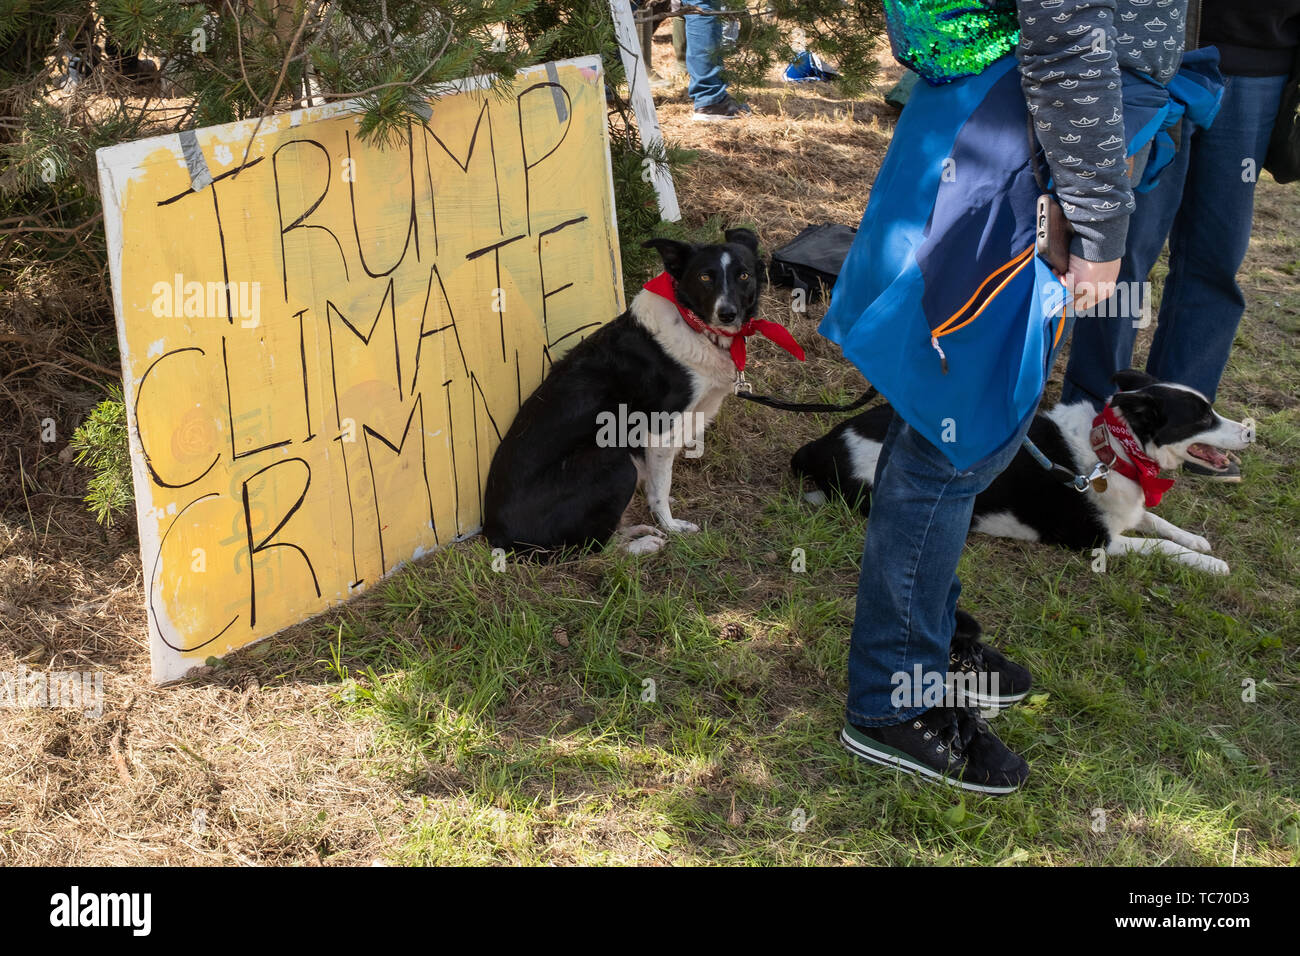 Shannon, Ireland, June. 5, 2019: Anti Trump dog protests at Shannon Airport, Ireland today Stock Photo